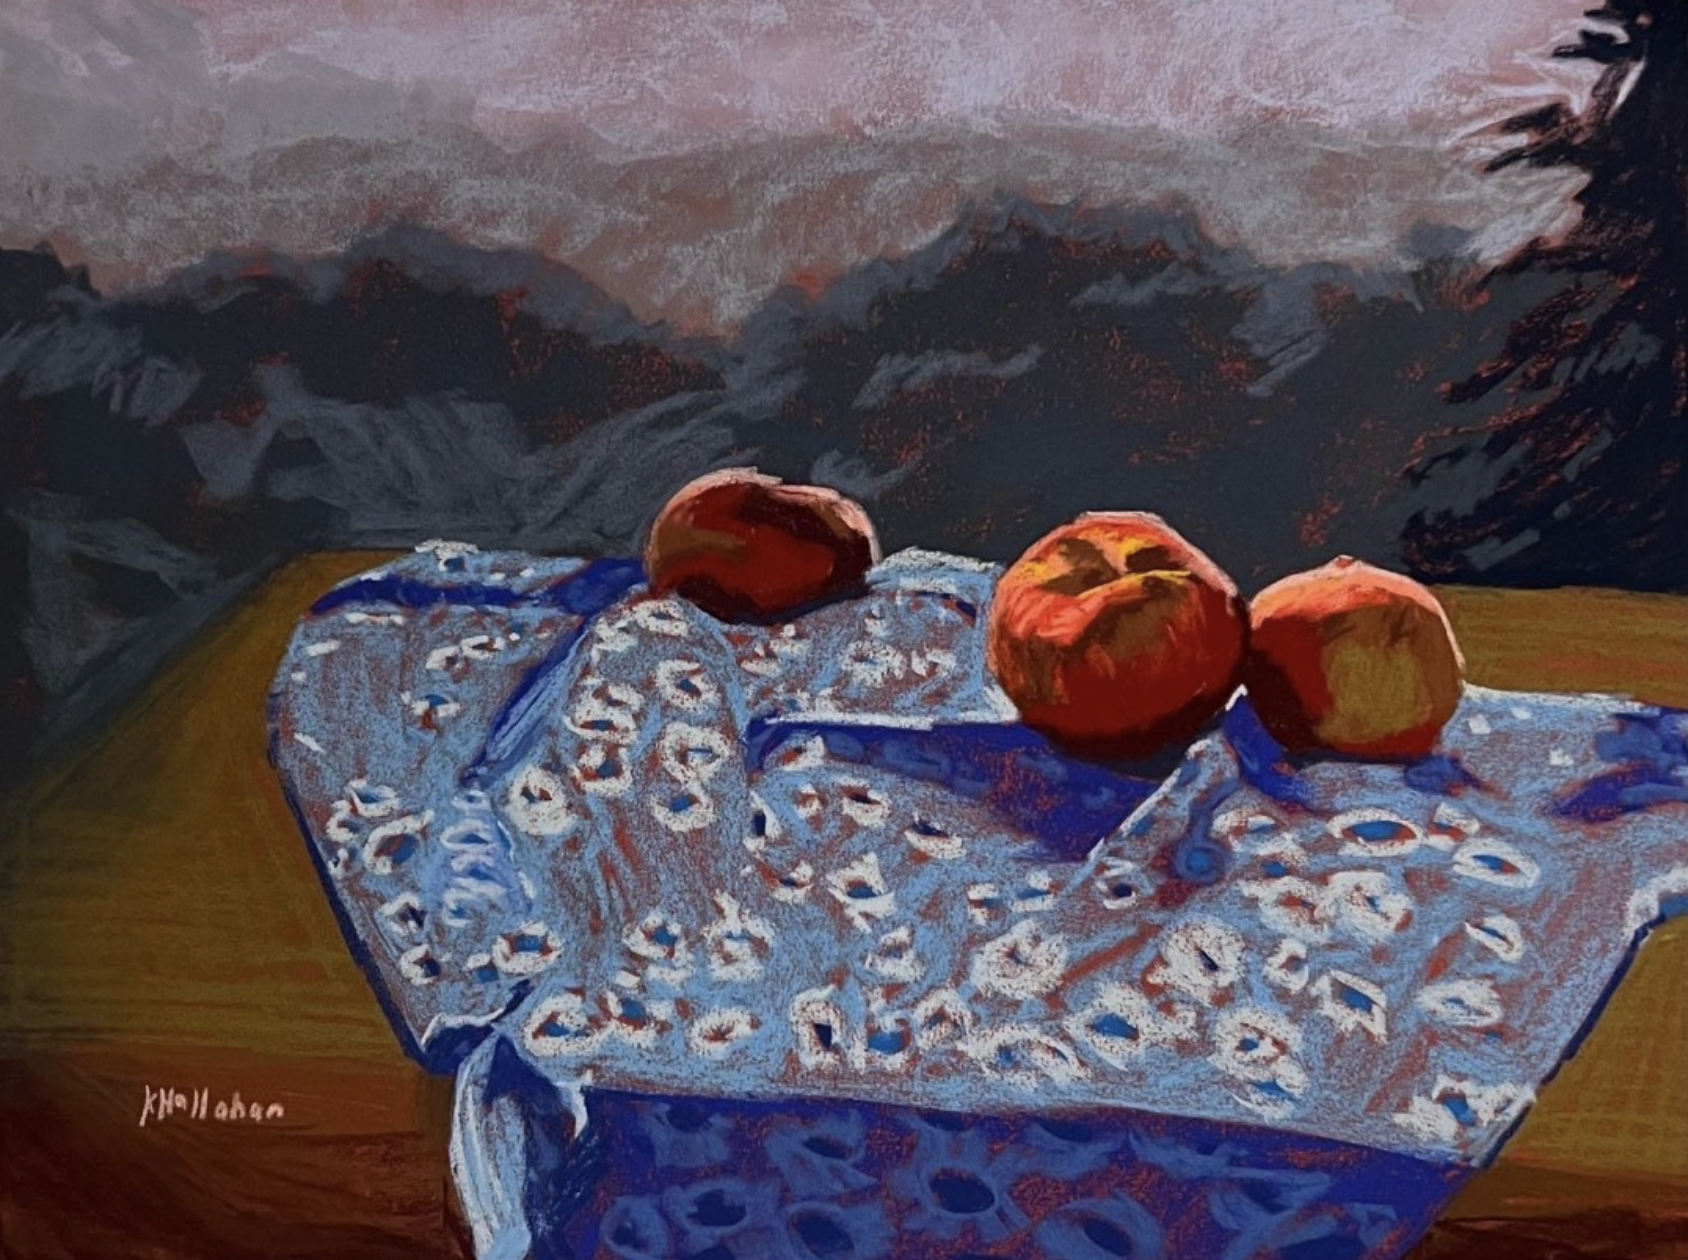 third quarter winners-Katie Halahan, "Peaches and a Mountain View," pastels on LaCarte, 18 x 24 in.